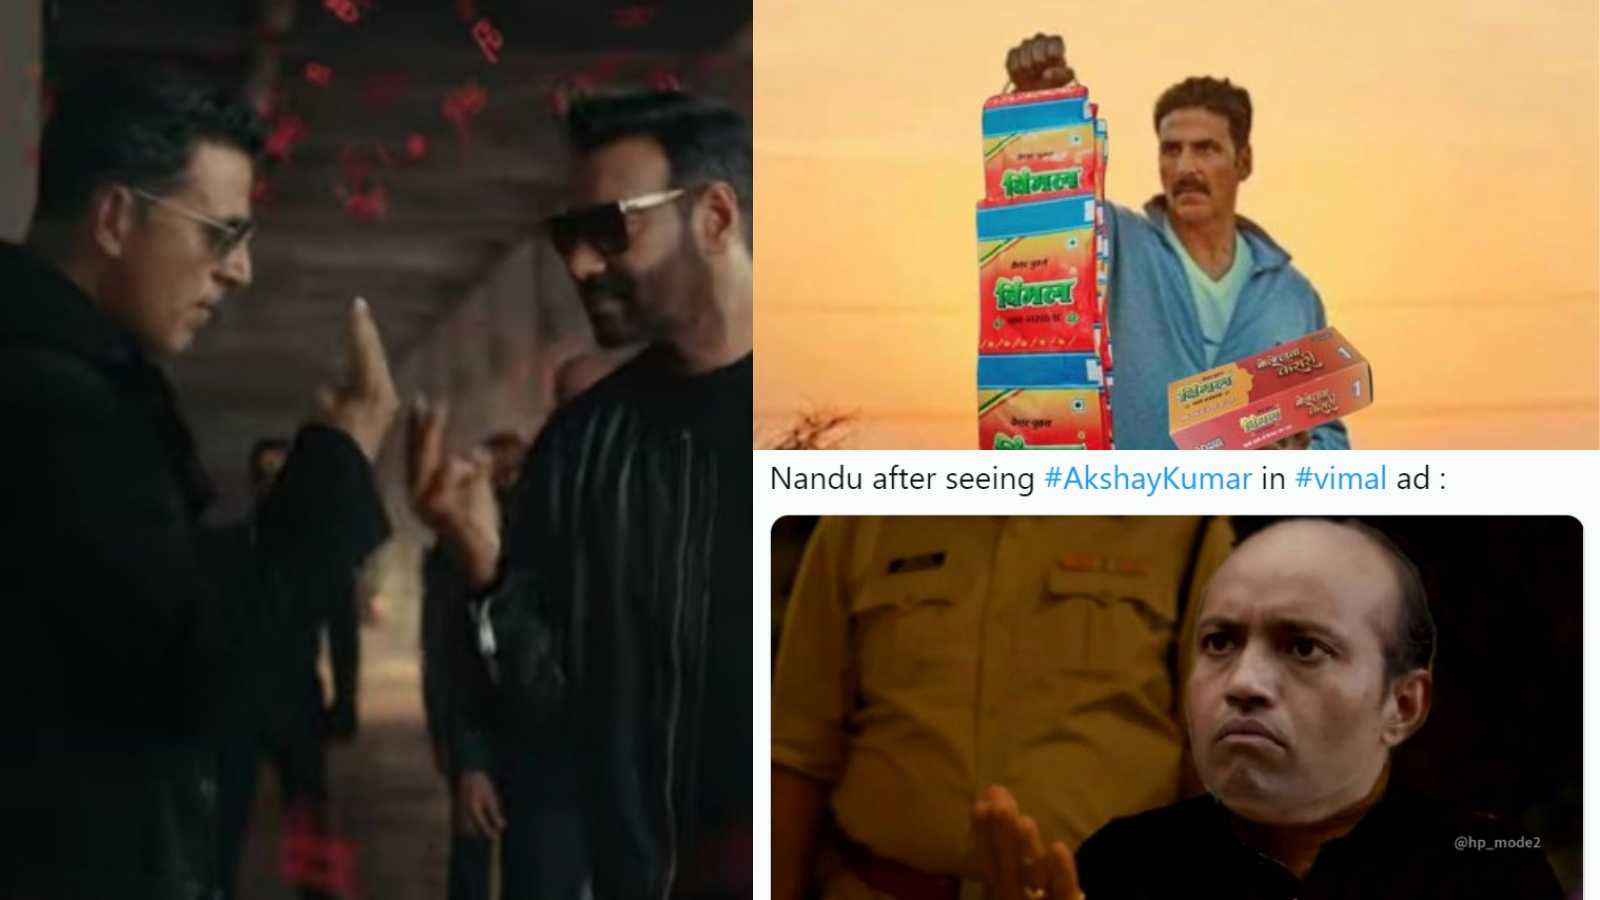 Ajay Kumar joins Ajay Devgn and Shah Rukh Khan in the 'Vimal-verse', Twitter reacts with hilarious memes featuring 'Nandu'